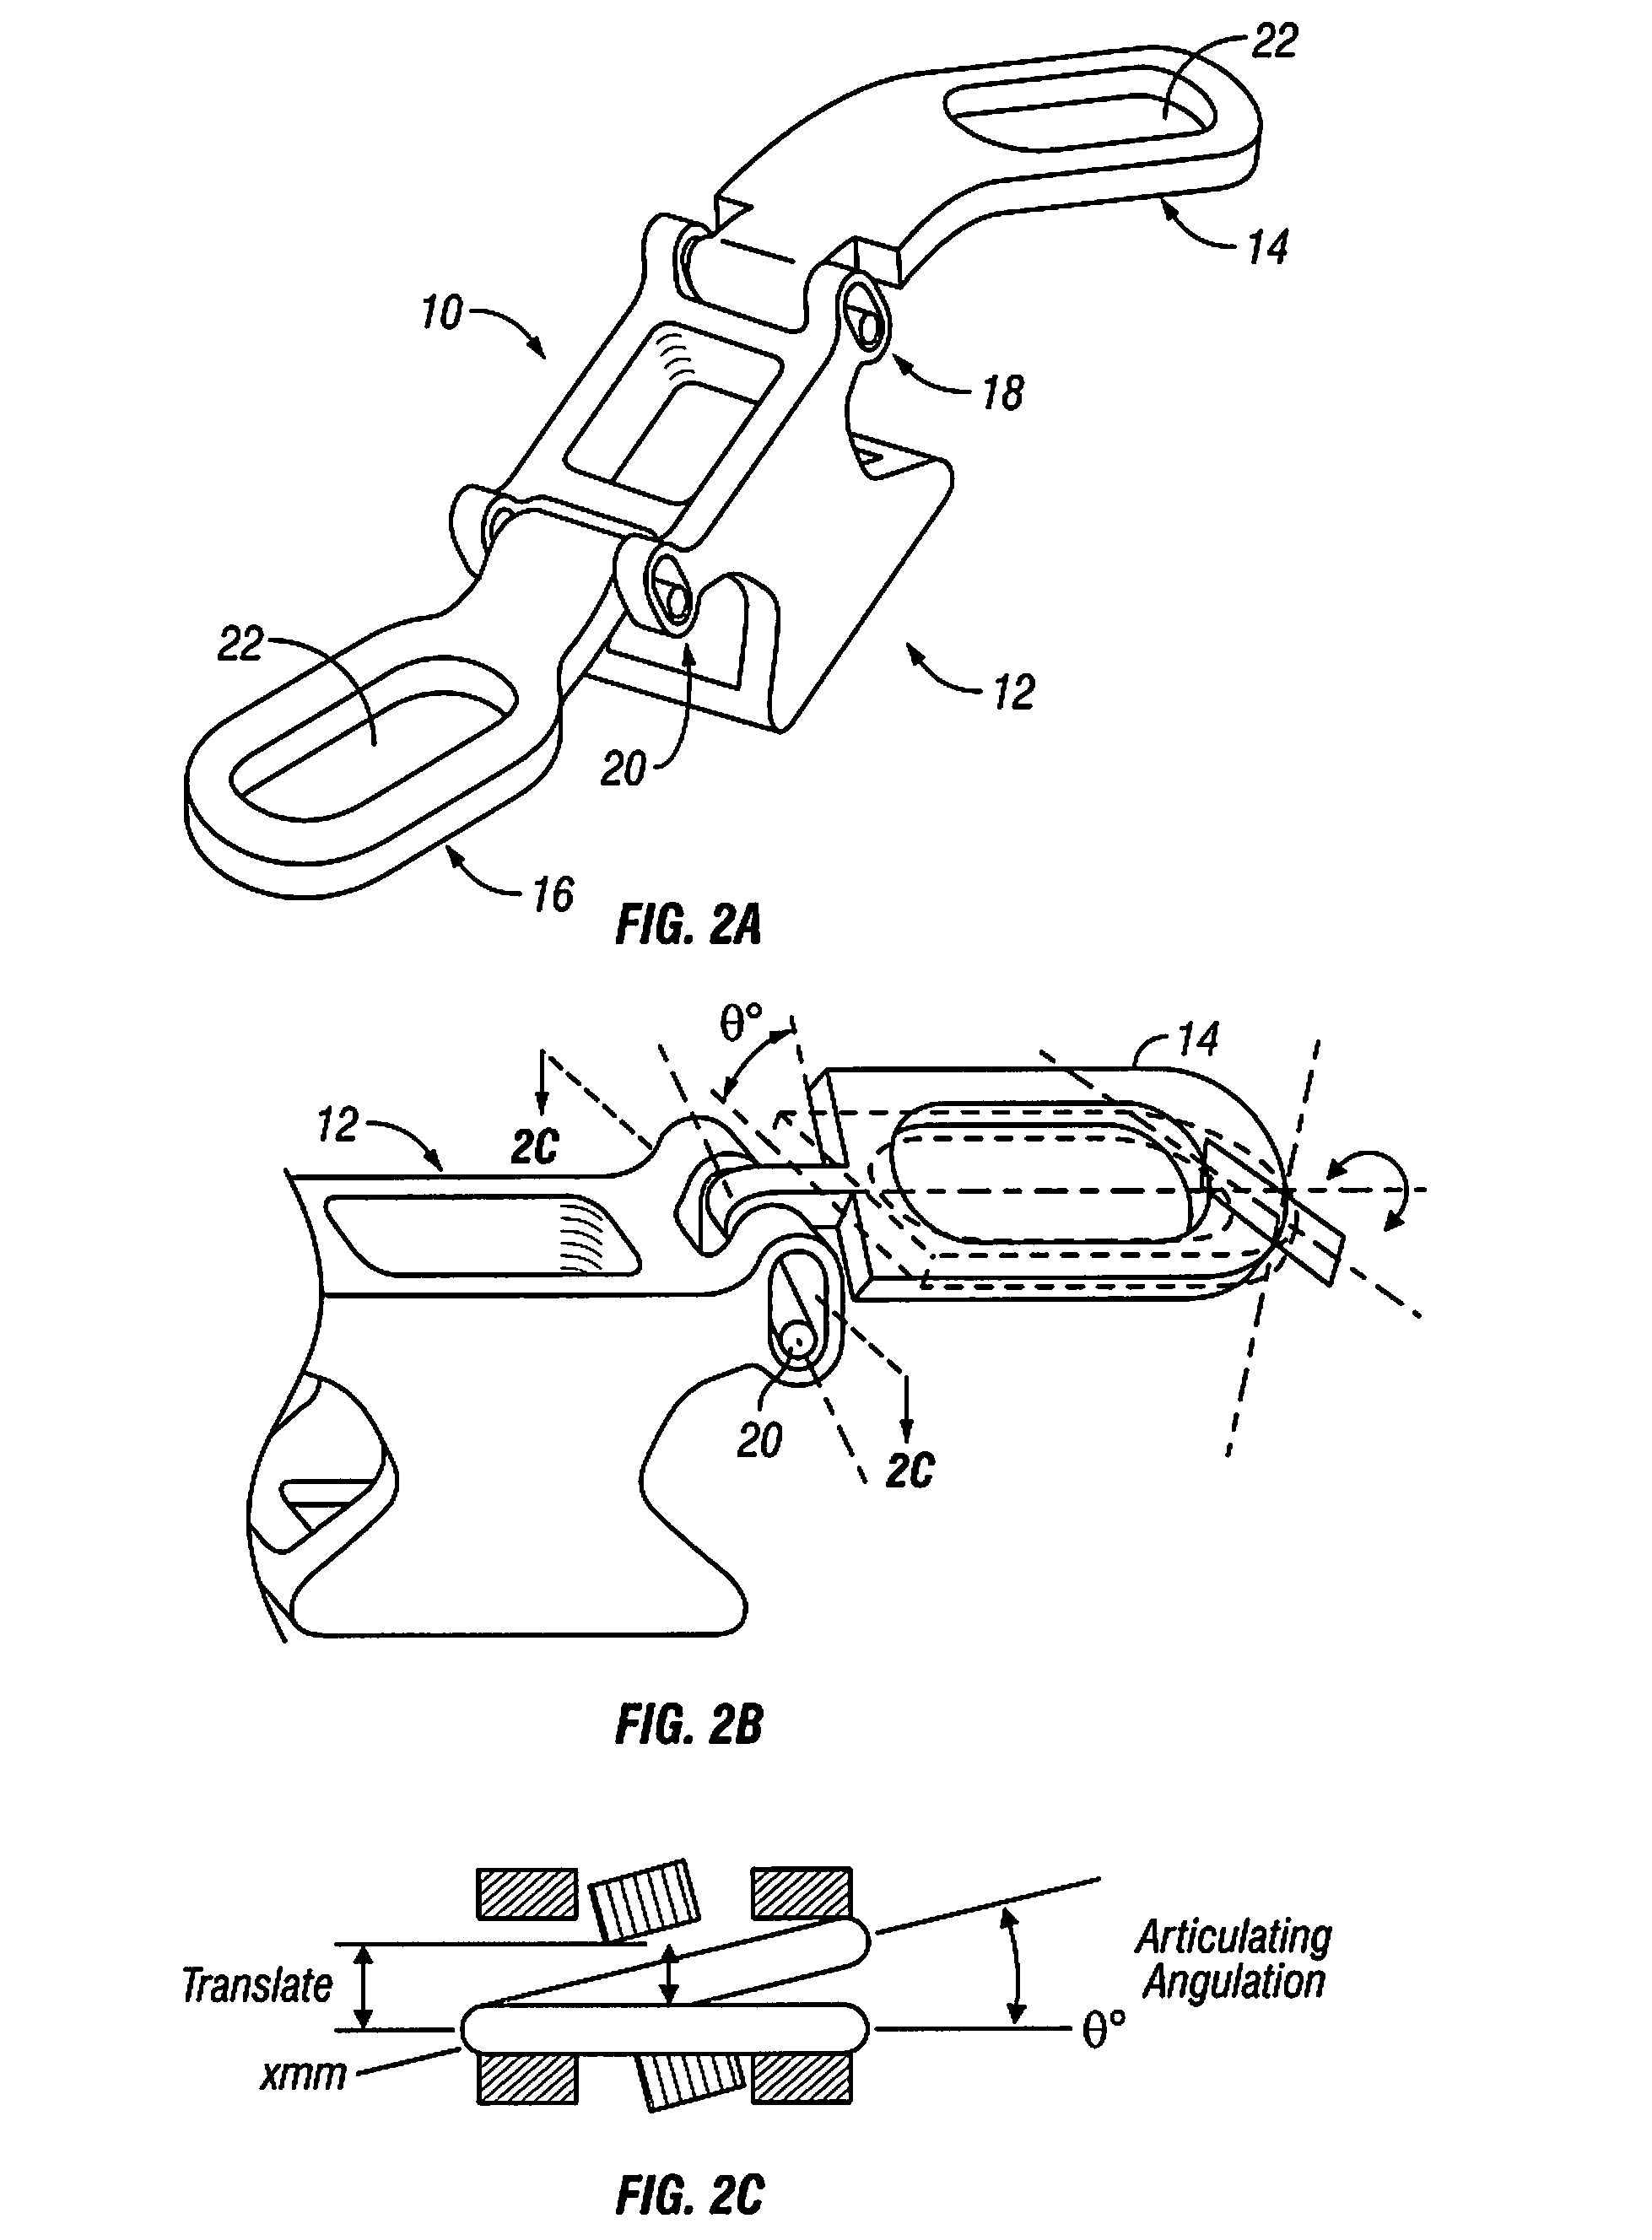 Laminoplasty Plates, Systems, And Devices, And Methods Relating to the Same